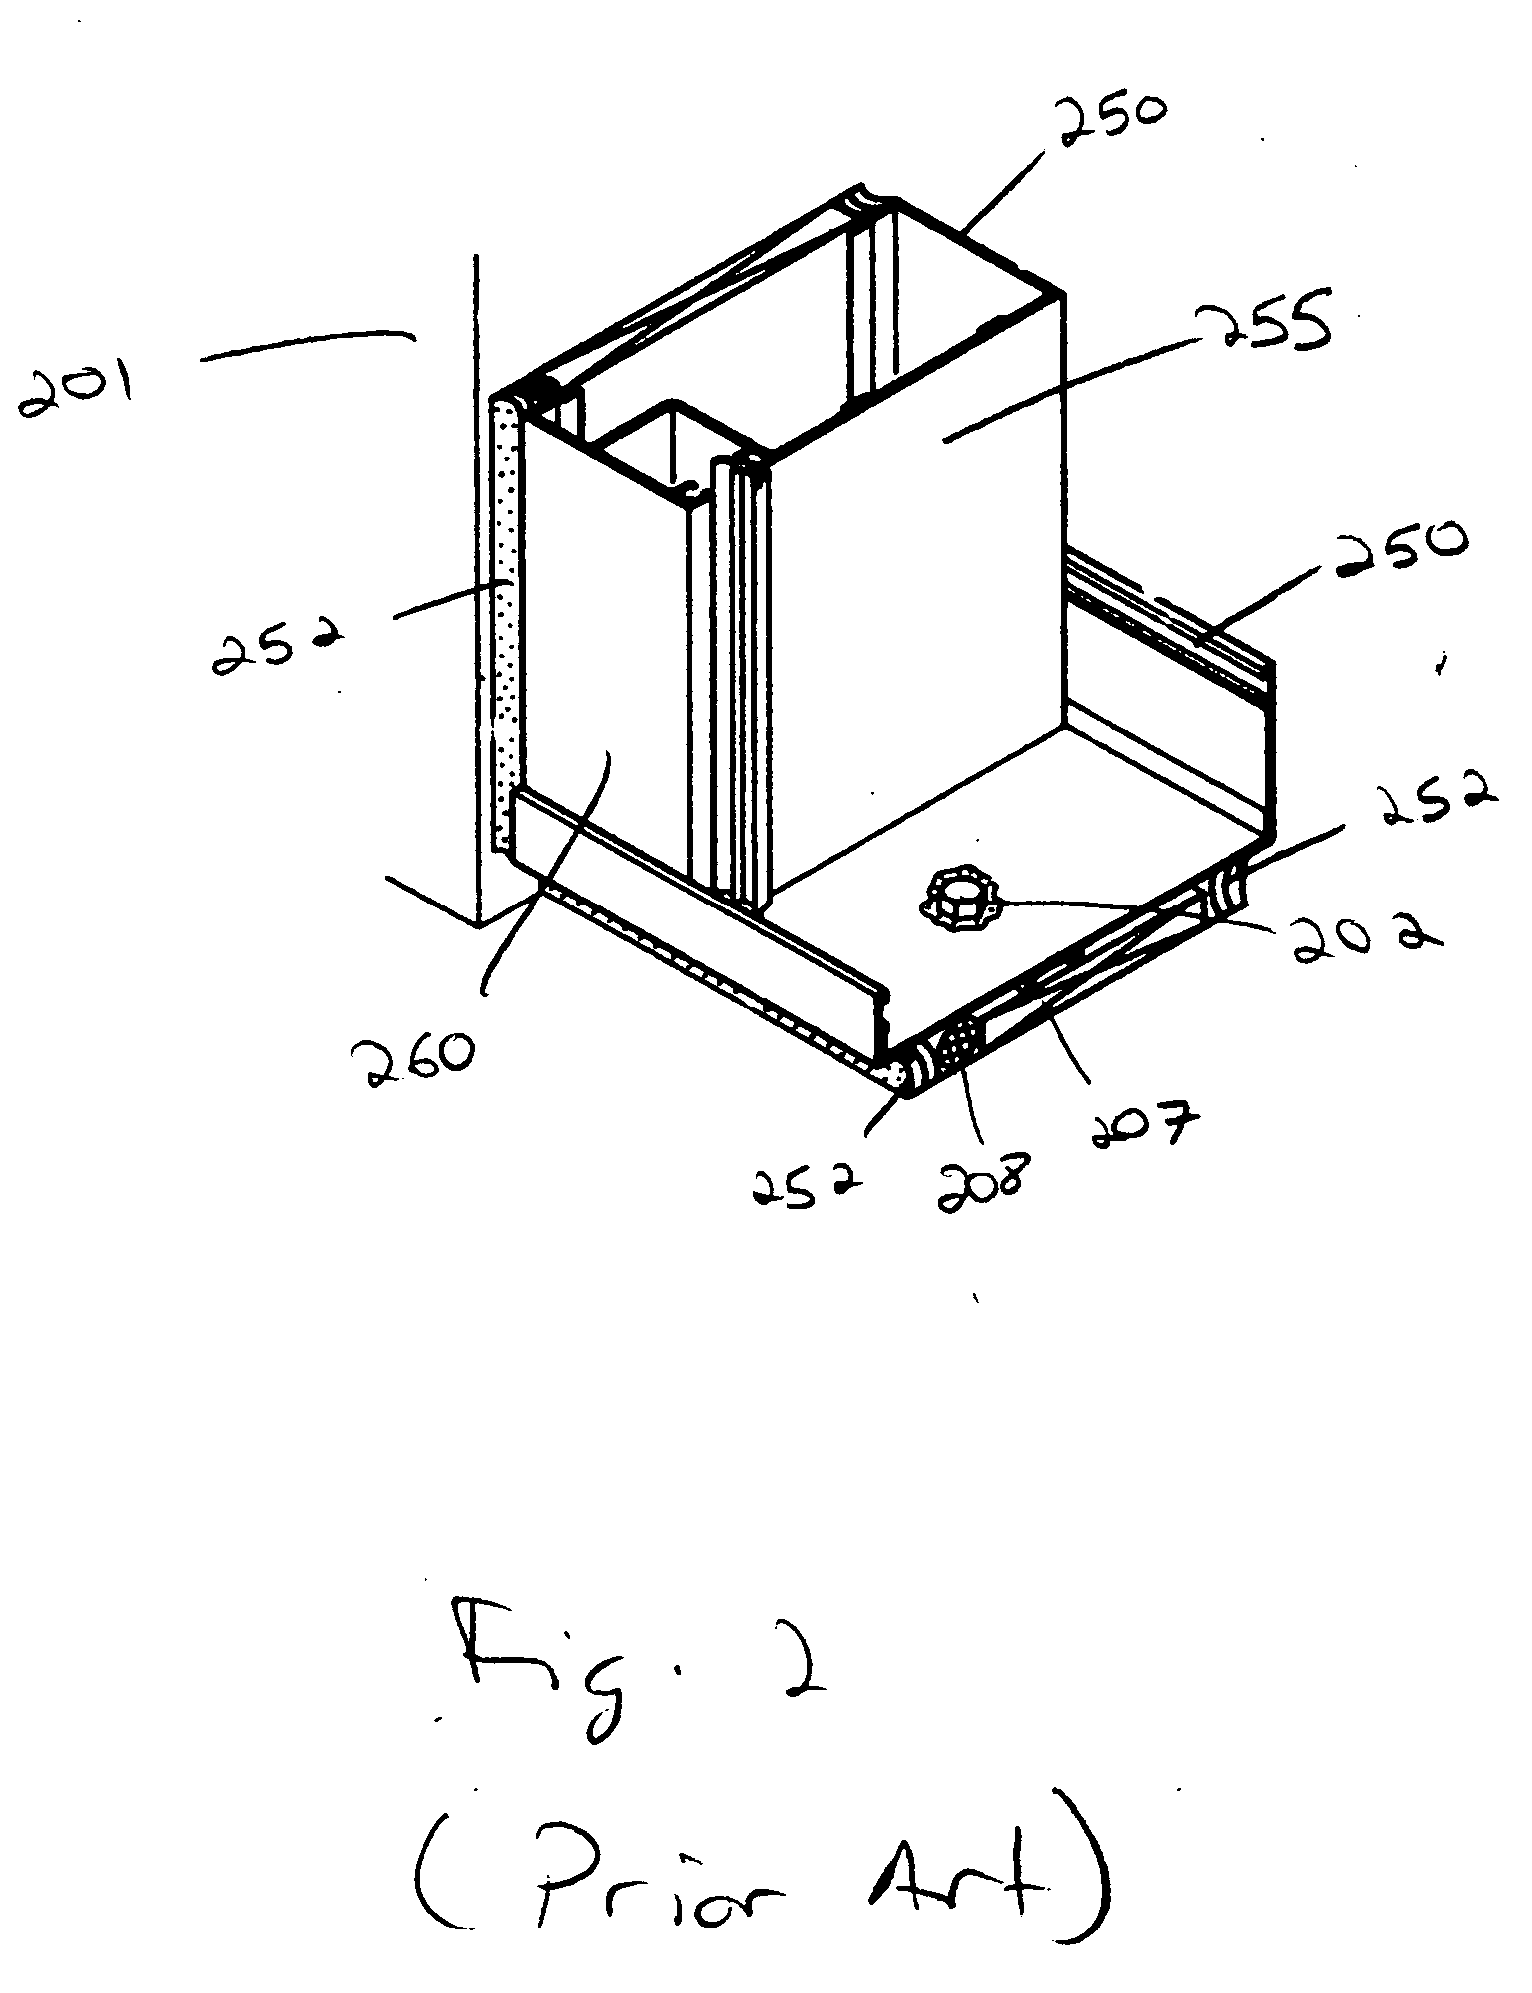 Universal fenestration cap system and method